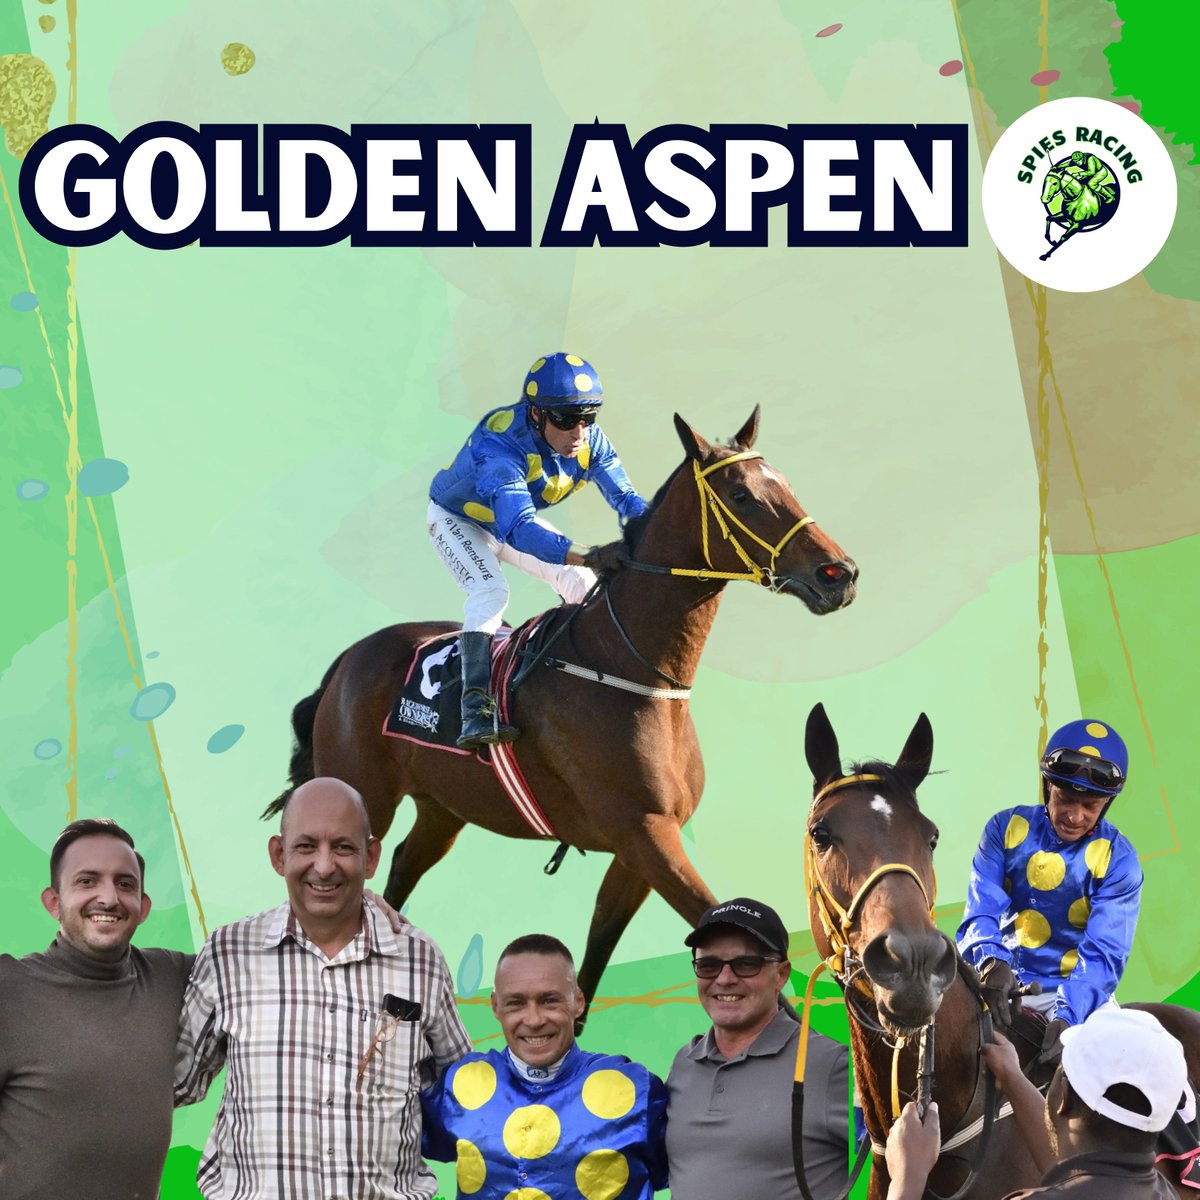 Big cheers for Golden Aspen, clinching a fantastic win yesterday! A huge thank you to the owners, our skilled jockey, and the dedicated Spies team for making this victory possible. Here’s to many more! 🏆🐎 #TeamEffort #WinningSpirit